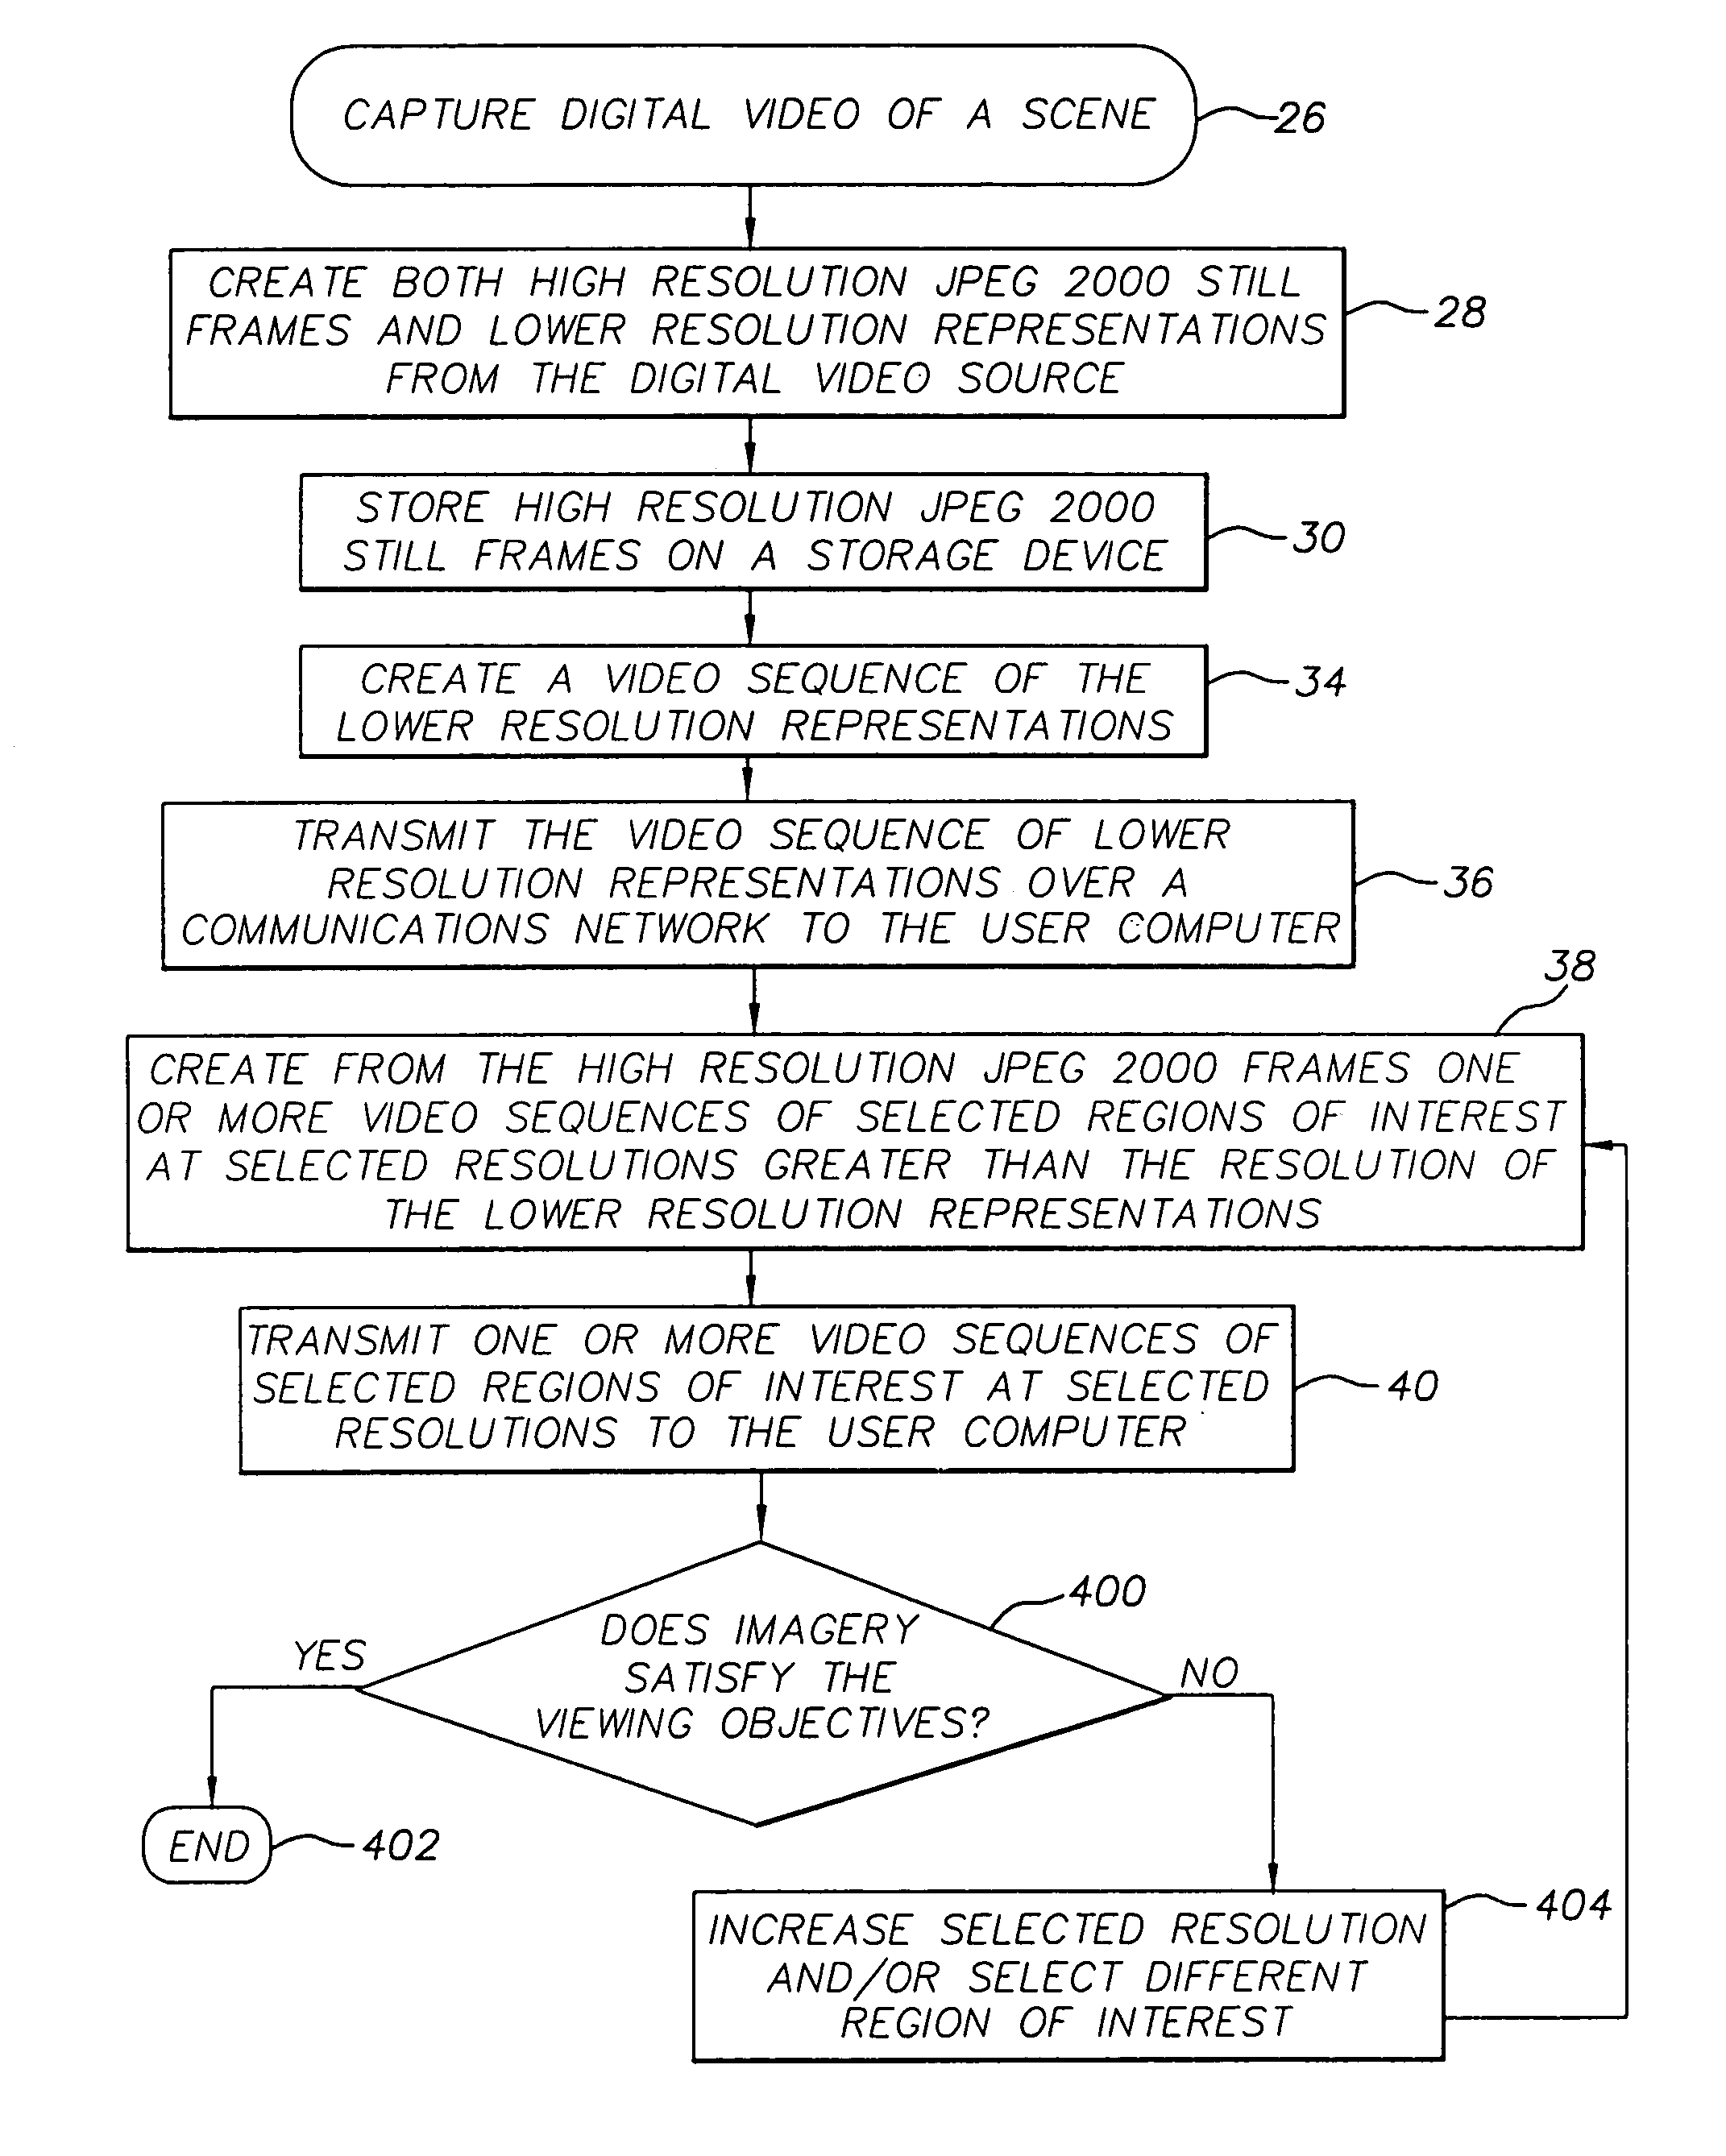 Method of transmitting selected regions of interest of digital video data at selected resolutions